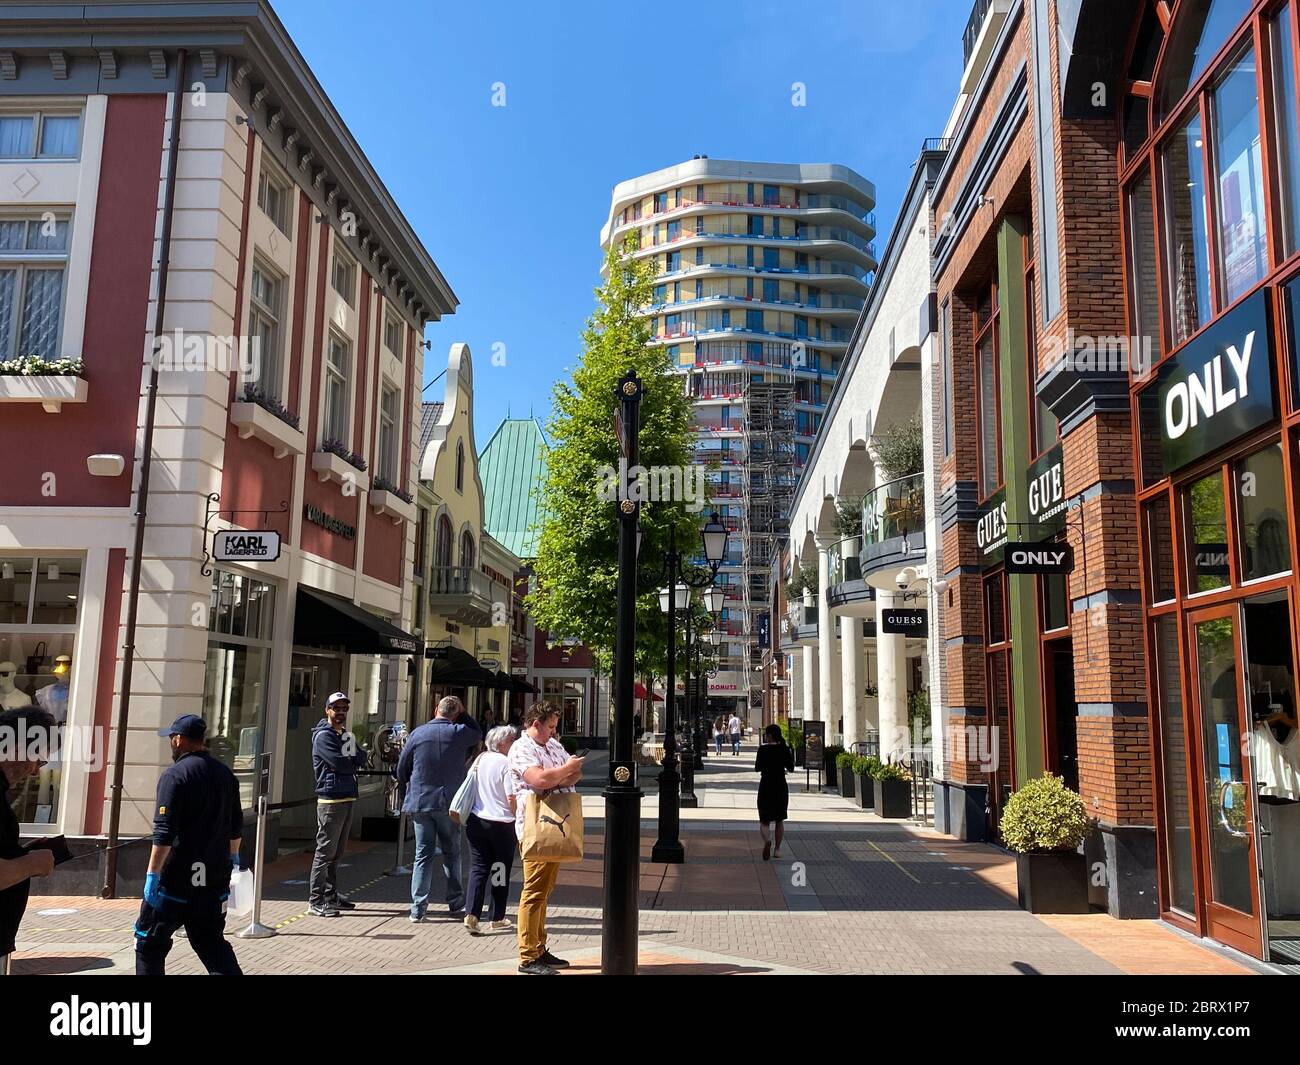 Perfect winkel geboorte Roermond (designer outlet), Netherlands - May 19. 2020: View on exterior  shopping street in summer with blue sky Stock Photo - Alamy